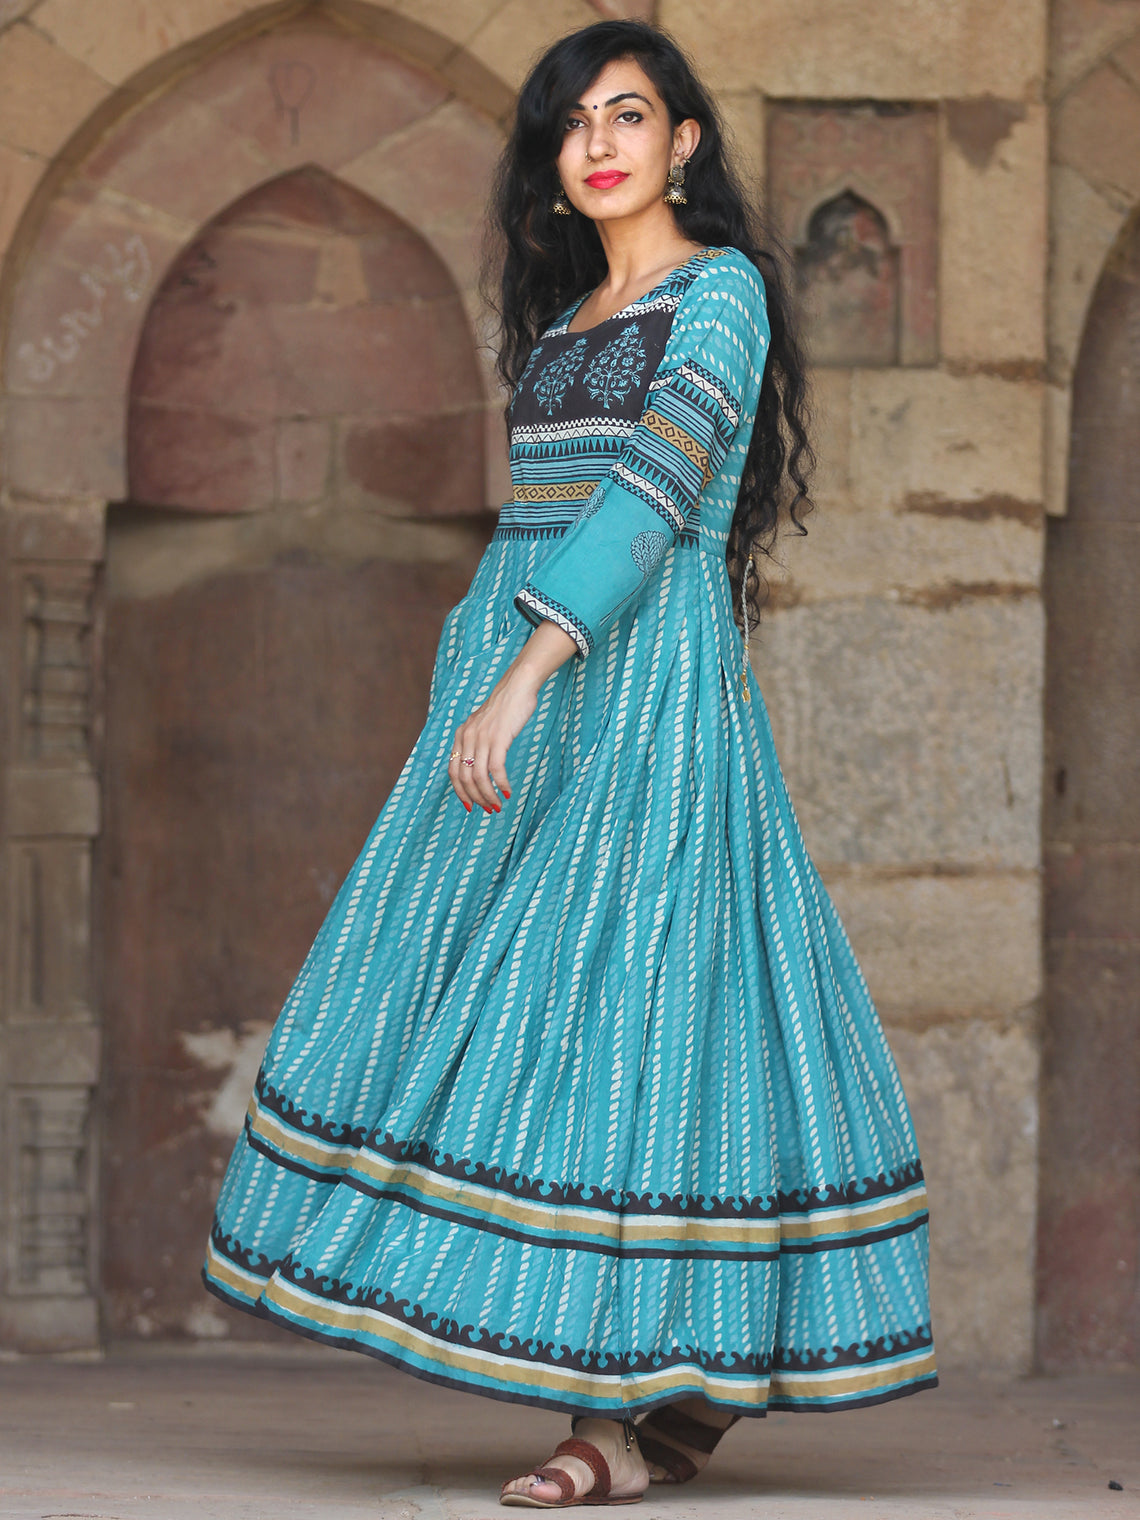 Naaz Block Heritage - Hand Block Printed Long Cotton Pleated Flare Dre ...